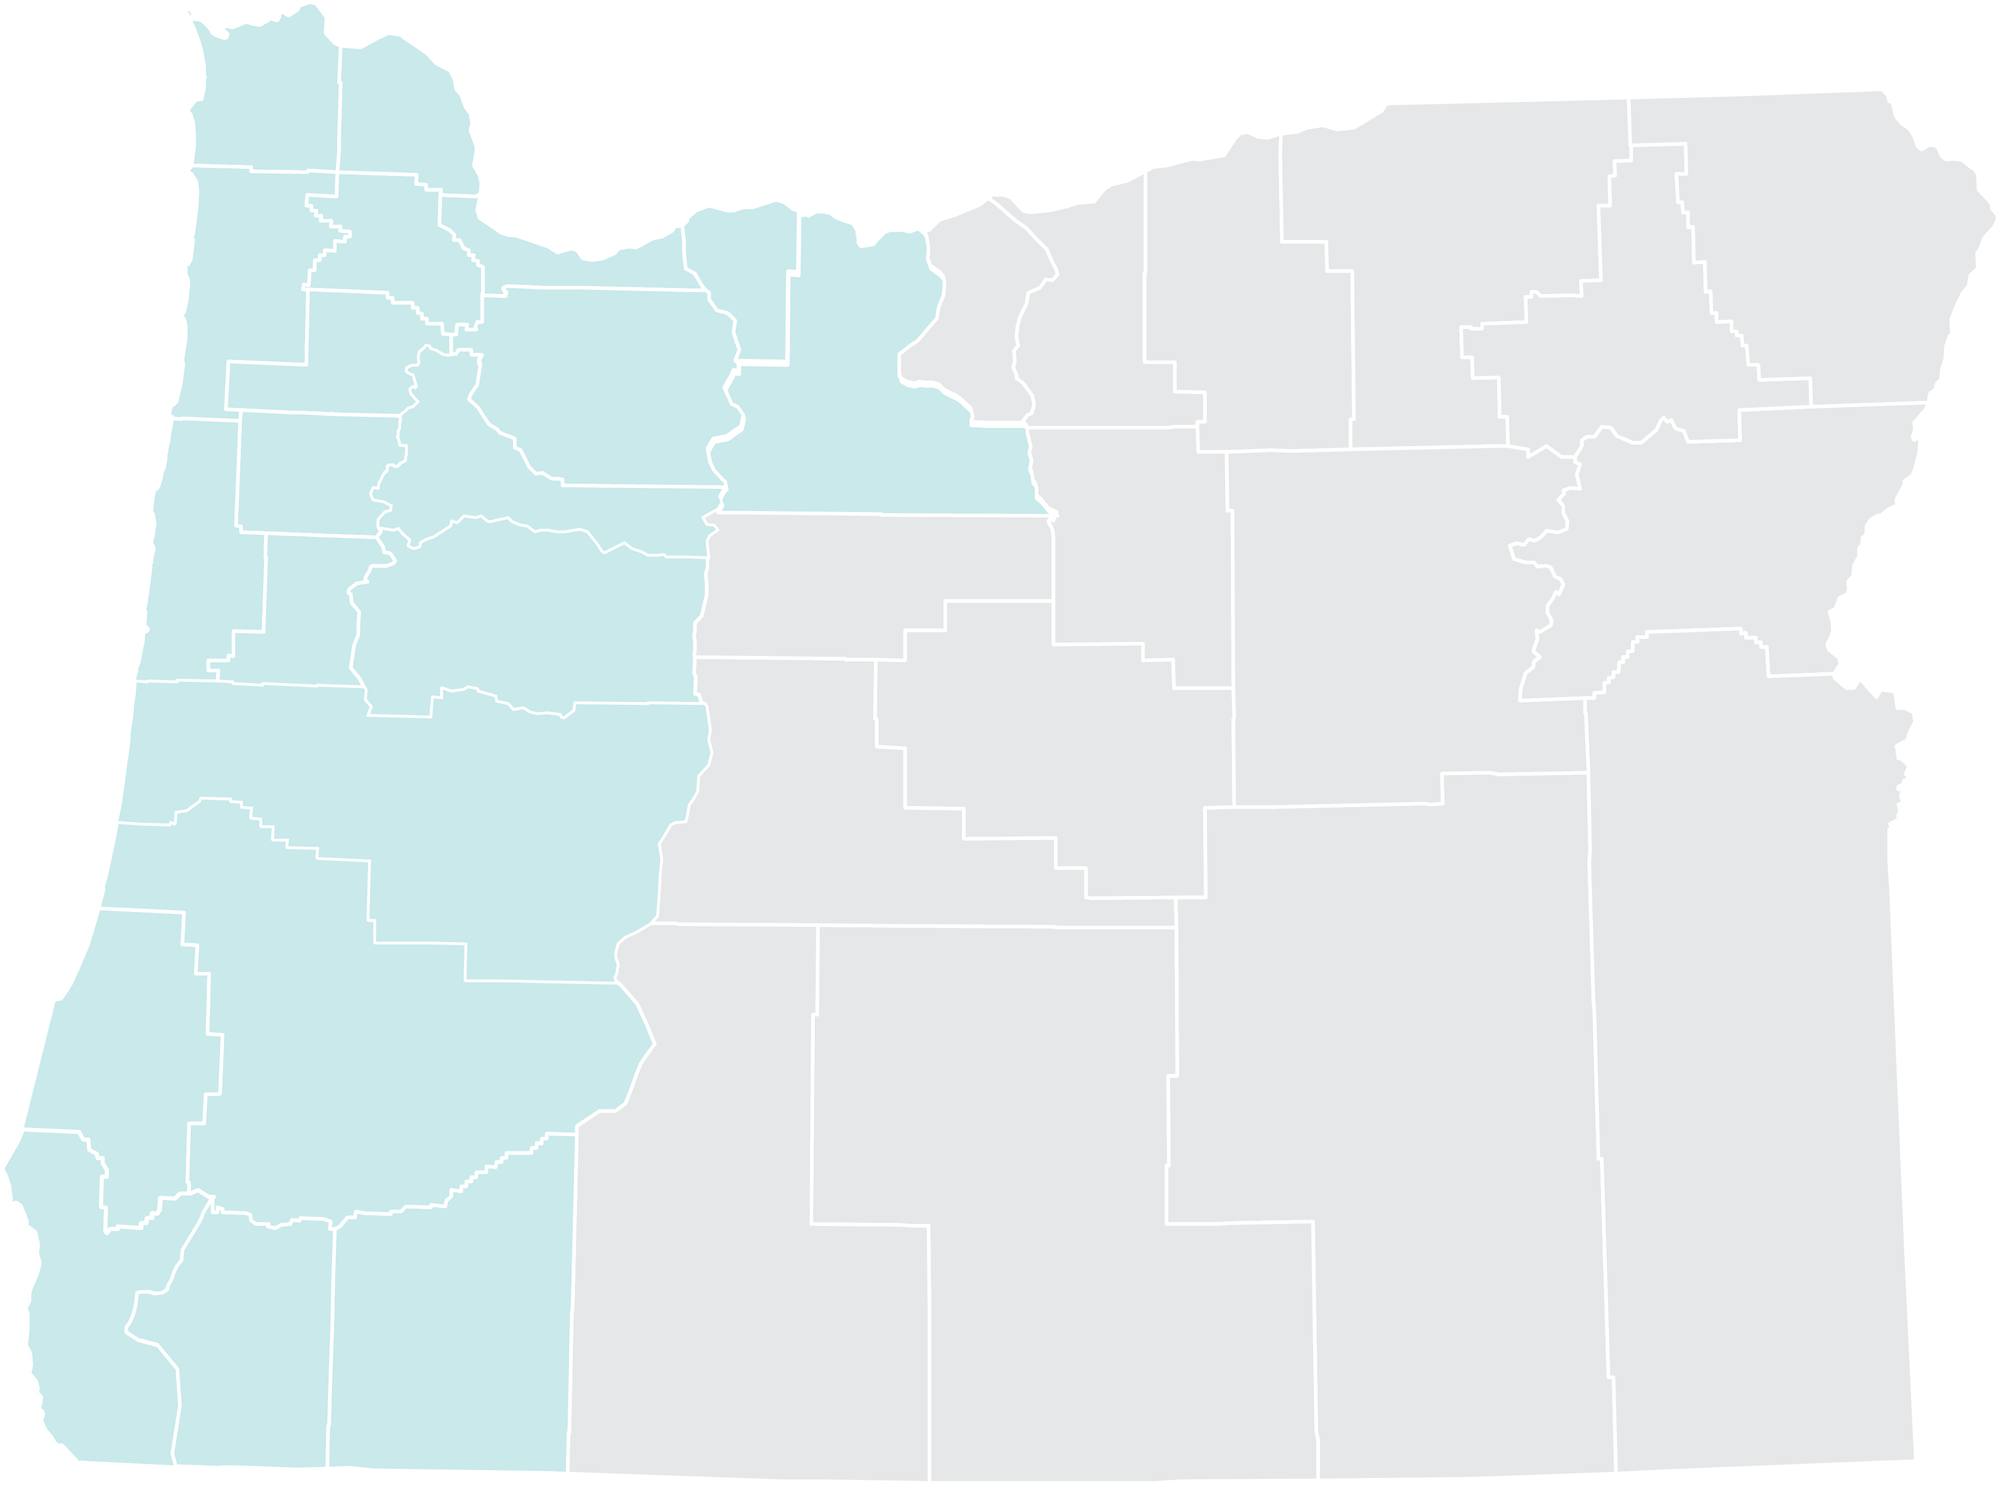 map showing counties in western oregon where big leaf maple occurs